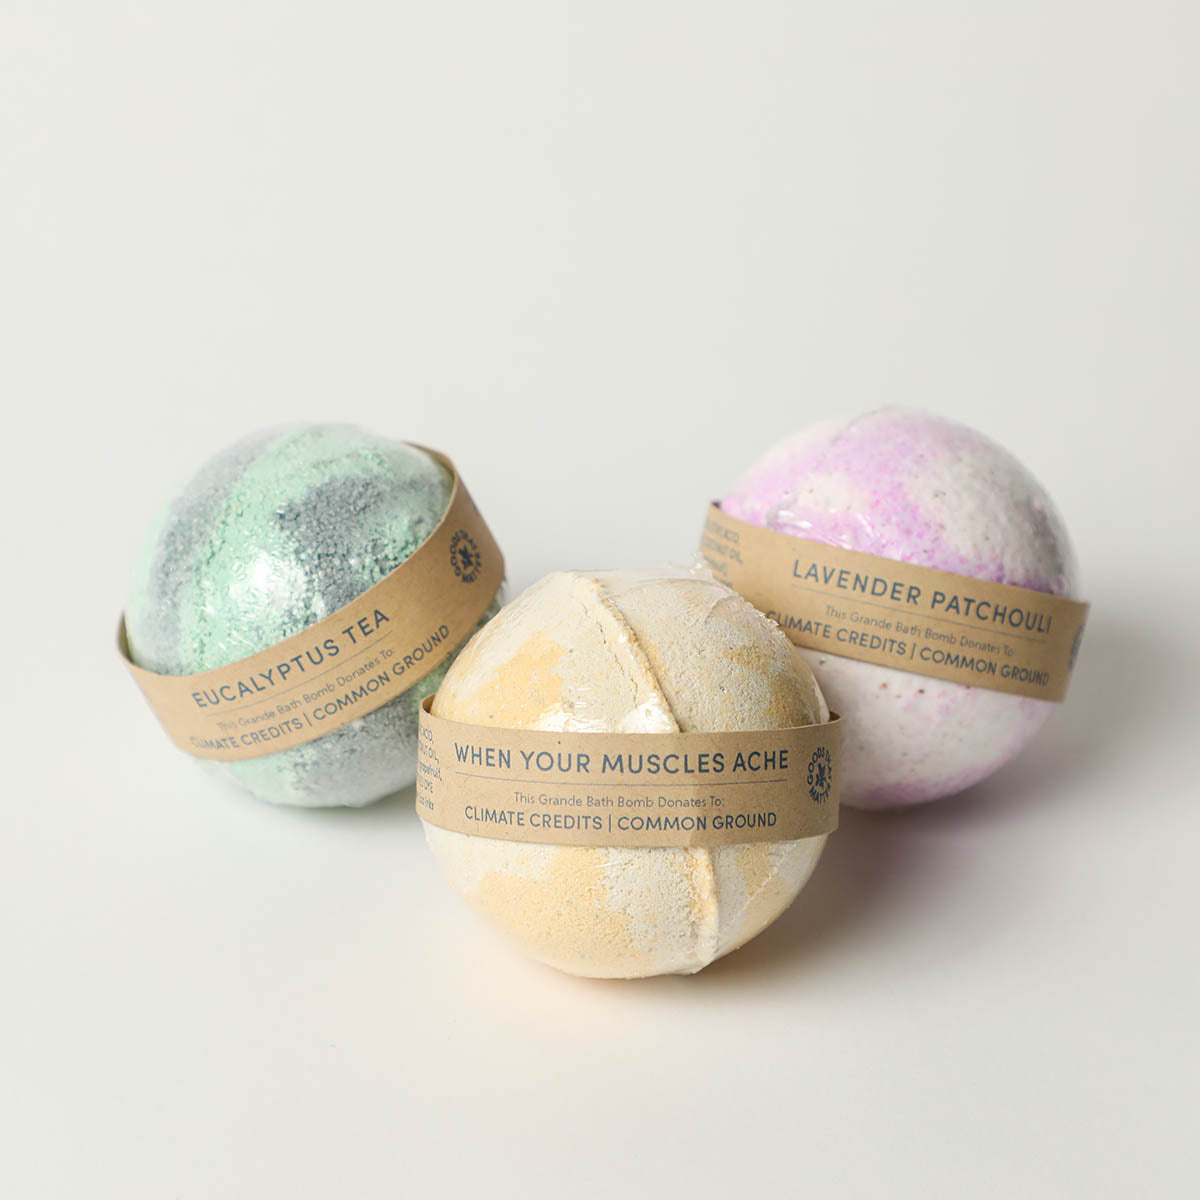 Bath Bombs - Donates to Common Ground Relief, Coastal Climate Credits